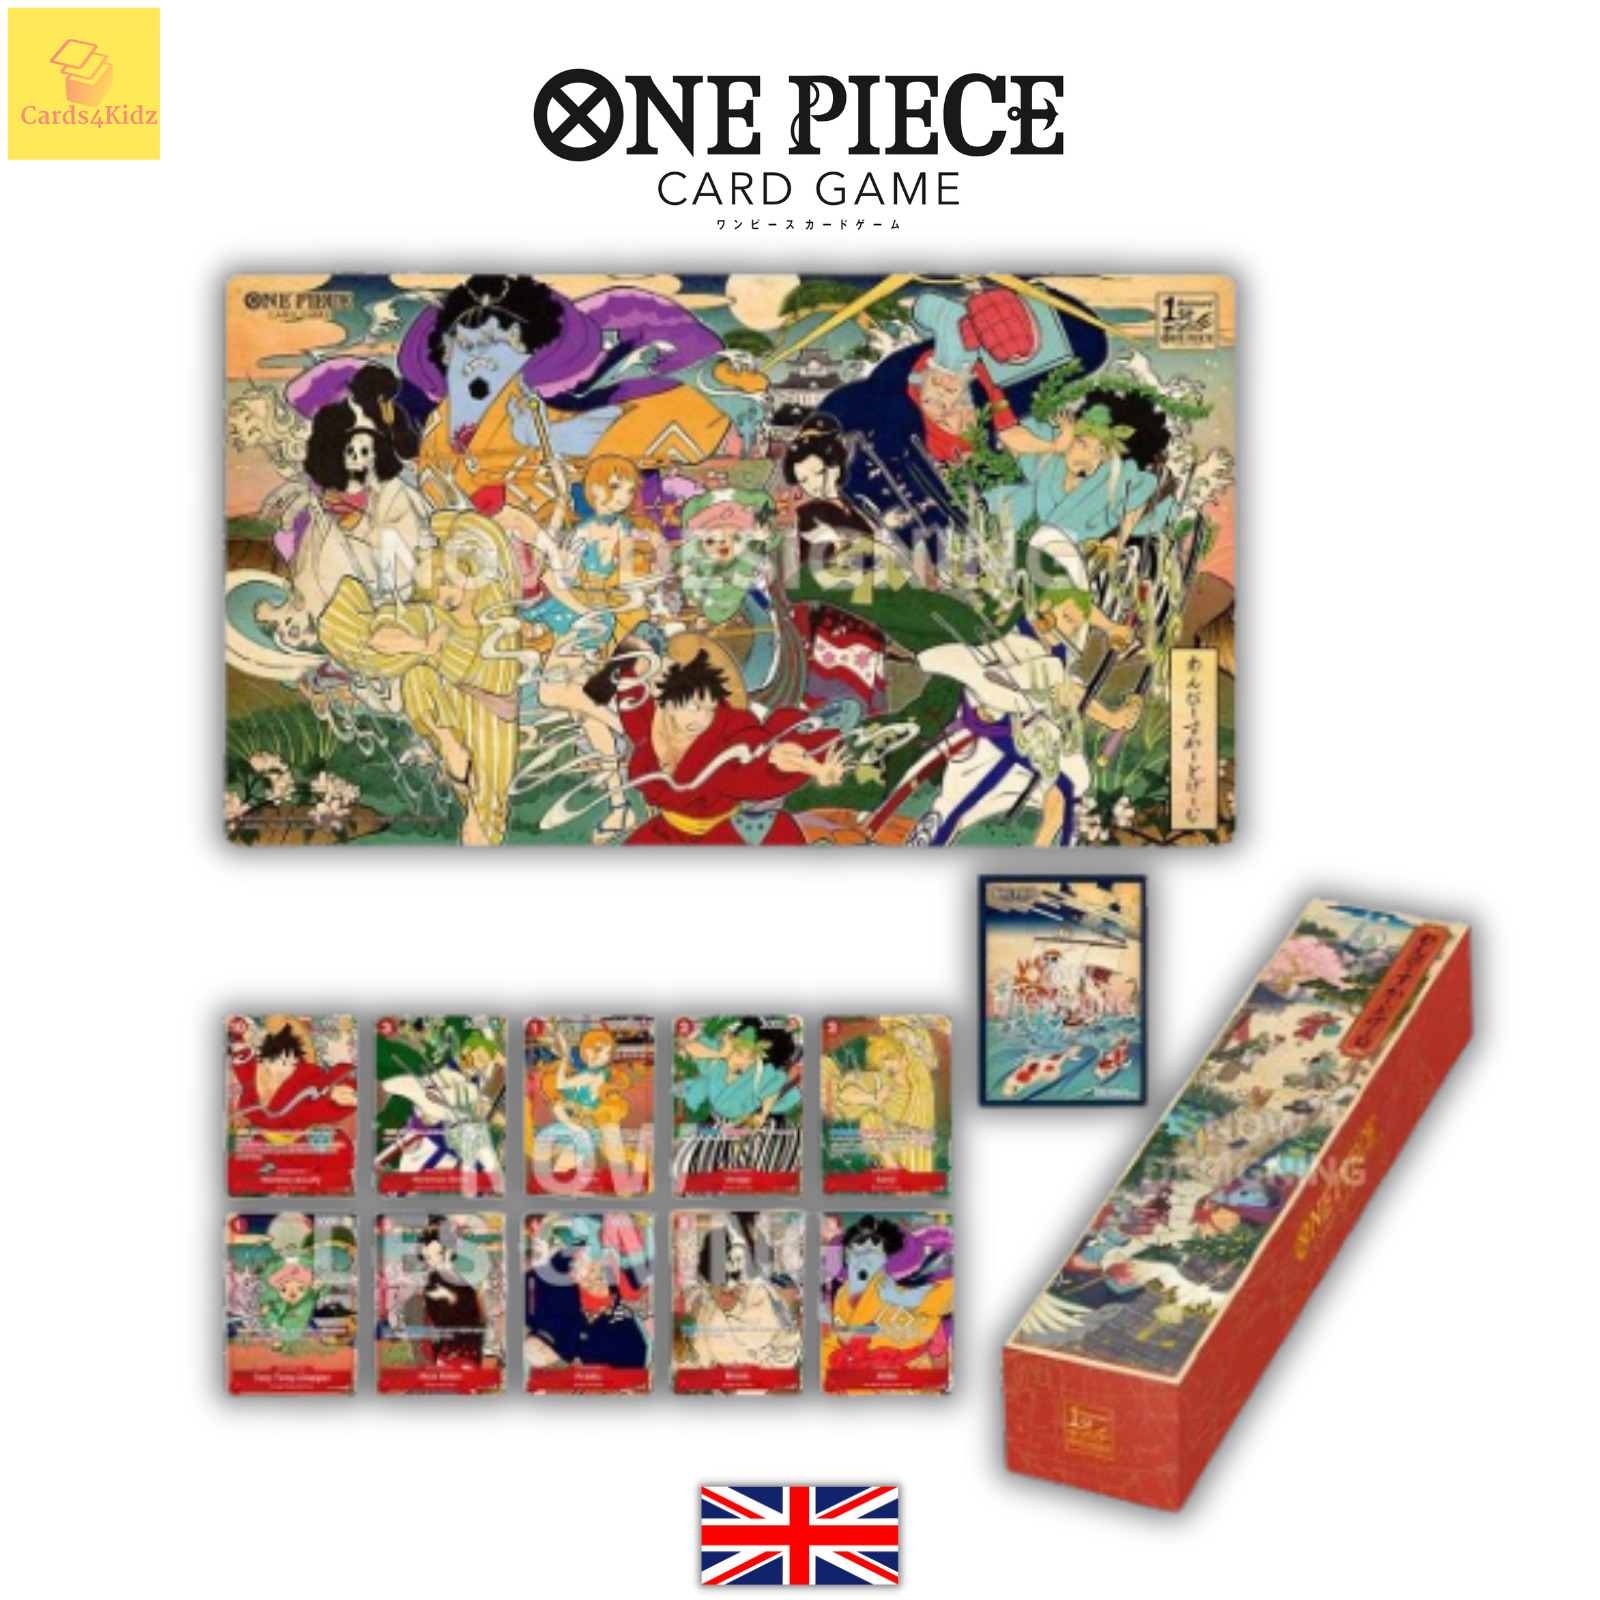 One Piece 1st Anniversary Set Collection Box New Sealed English Preorder 28/06